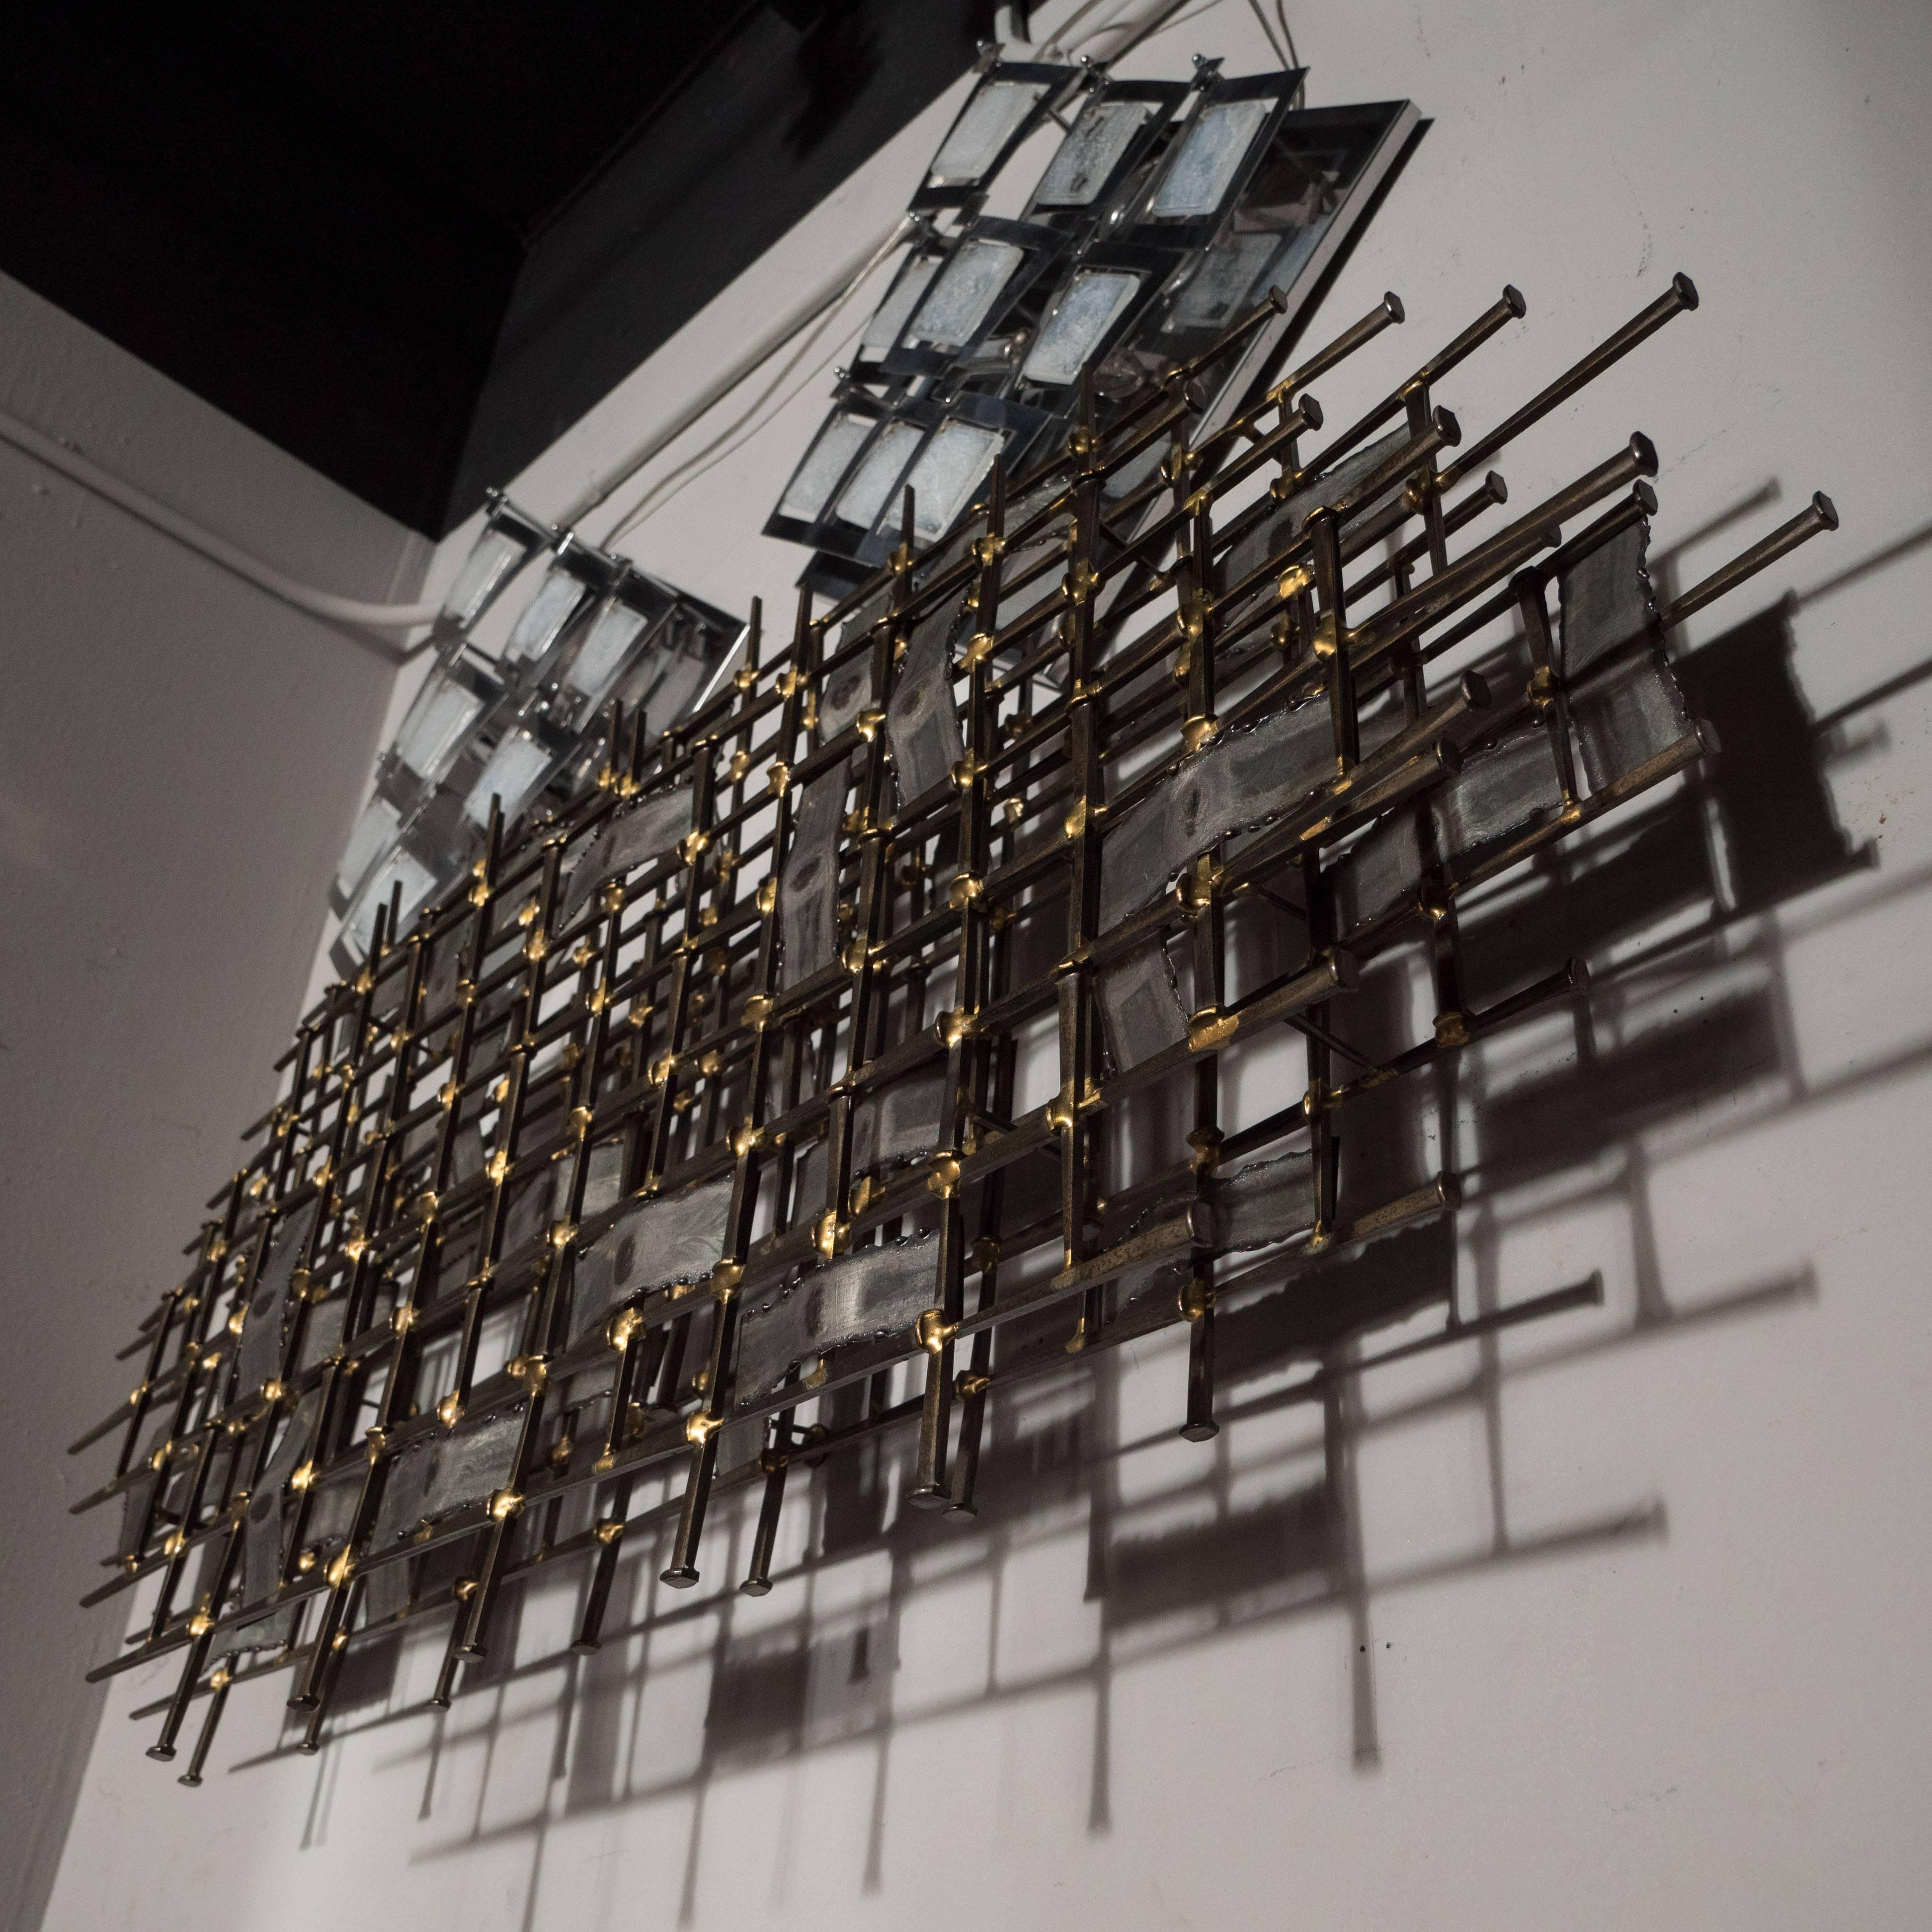 This sophisticated Mid-Century Modern sculpture- realized in the manner of Silas Seandle- was realized in the United States, circa 1970. It consists of a lattice work of rectangular tapered steel forms- resembling oversized nails- adjoined by